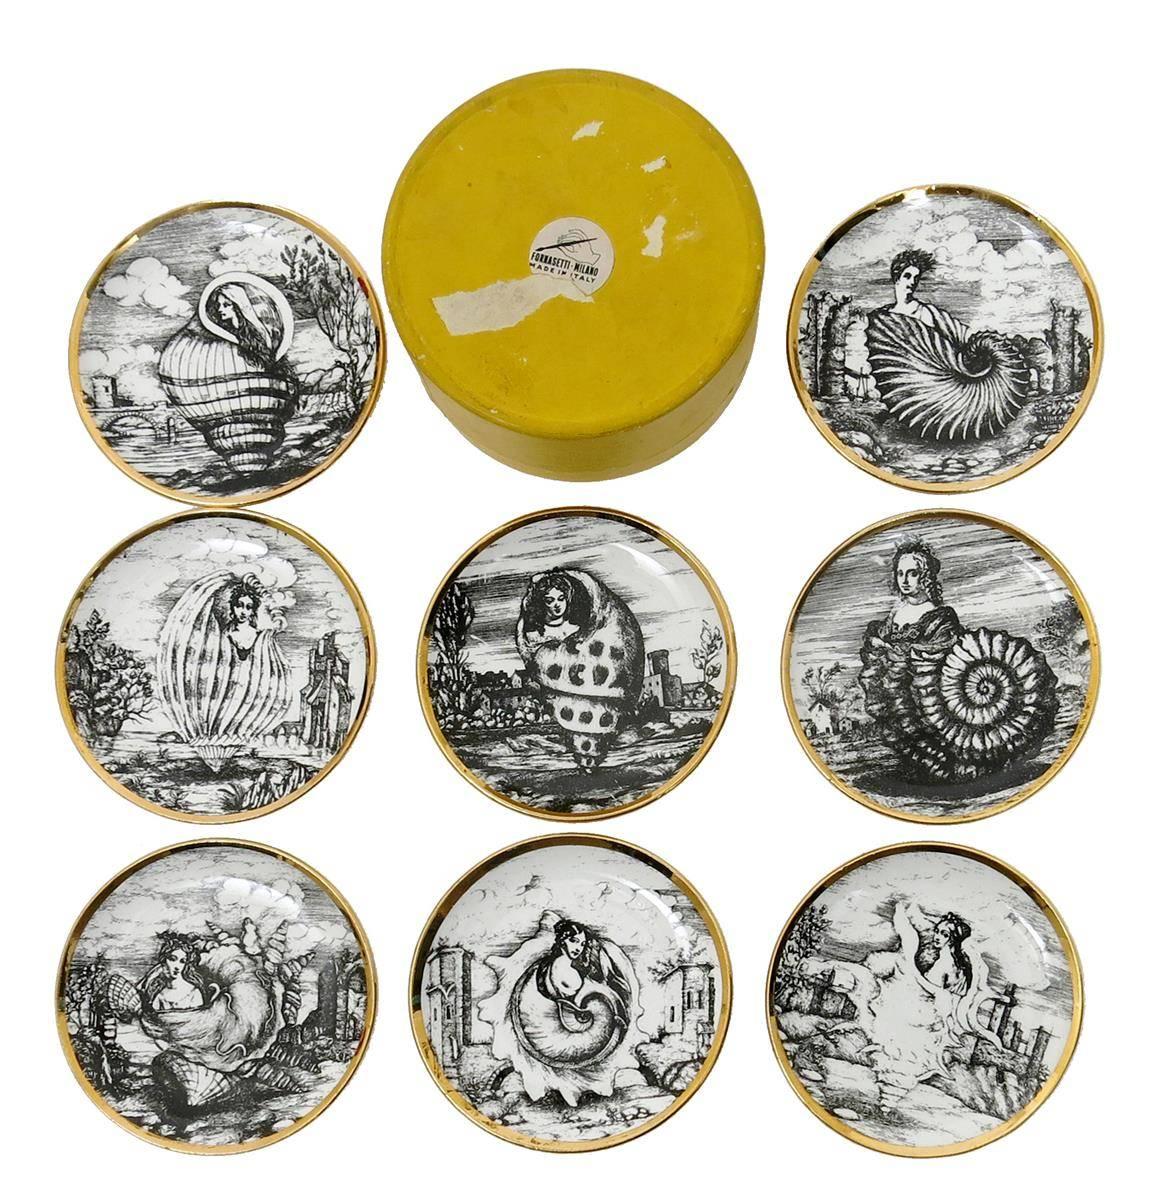 Piero Fornasetti vintage cocktail coasters in Oceanidi pattern with original box,
1950s.

Great early set of coasters with nautical theme. While we call these coasters, they were most likely for bar food like olives etc.

Reference: Fornasetti